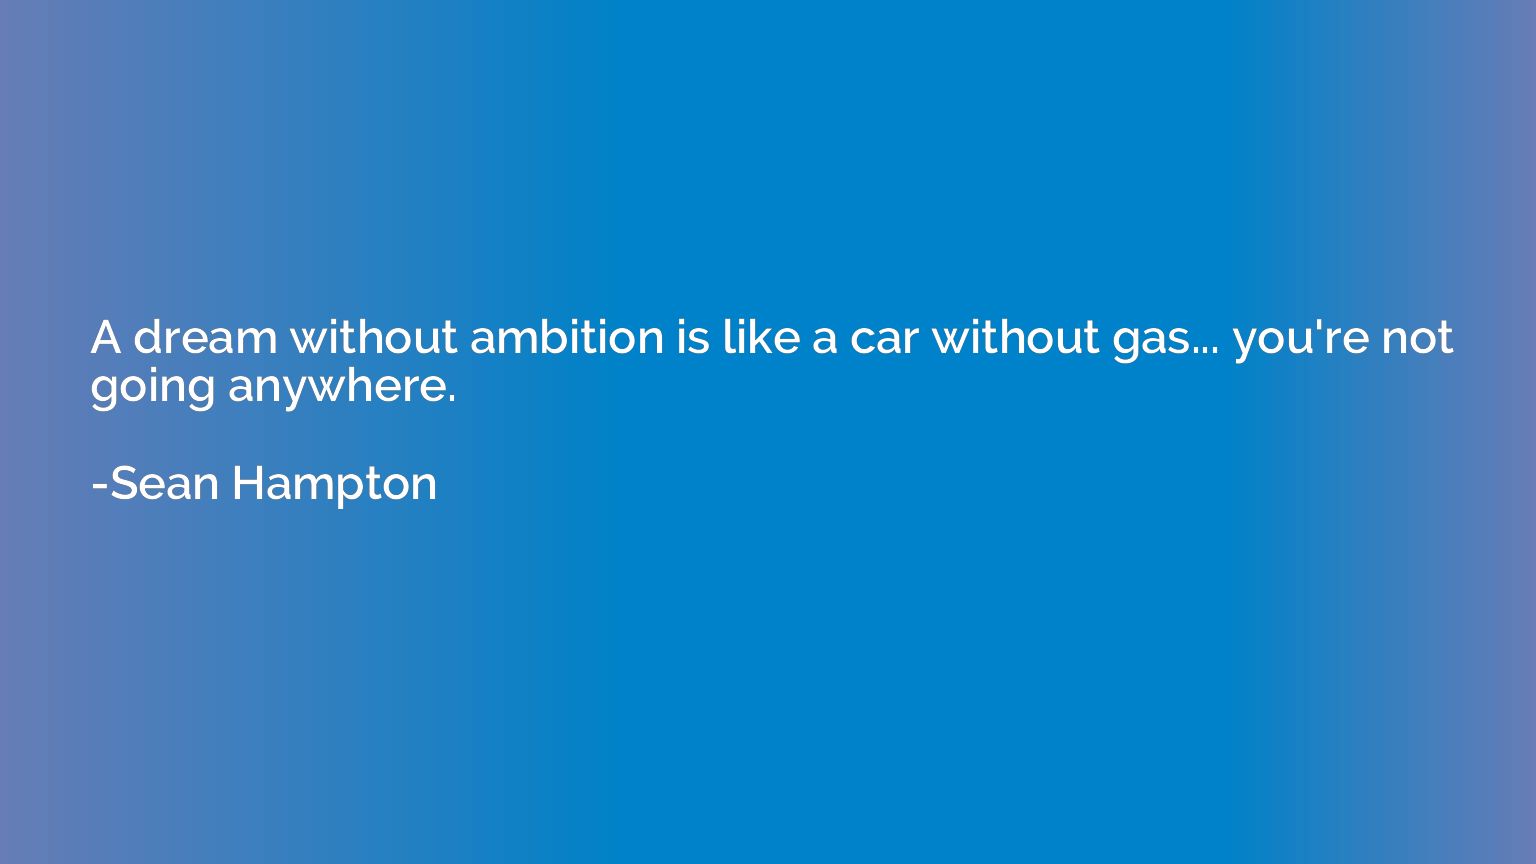 A dream without ambition is like a car without gas... you're